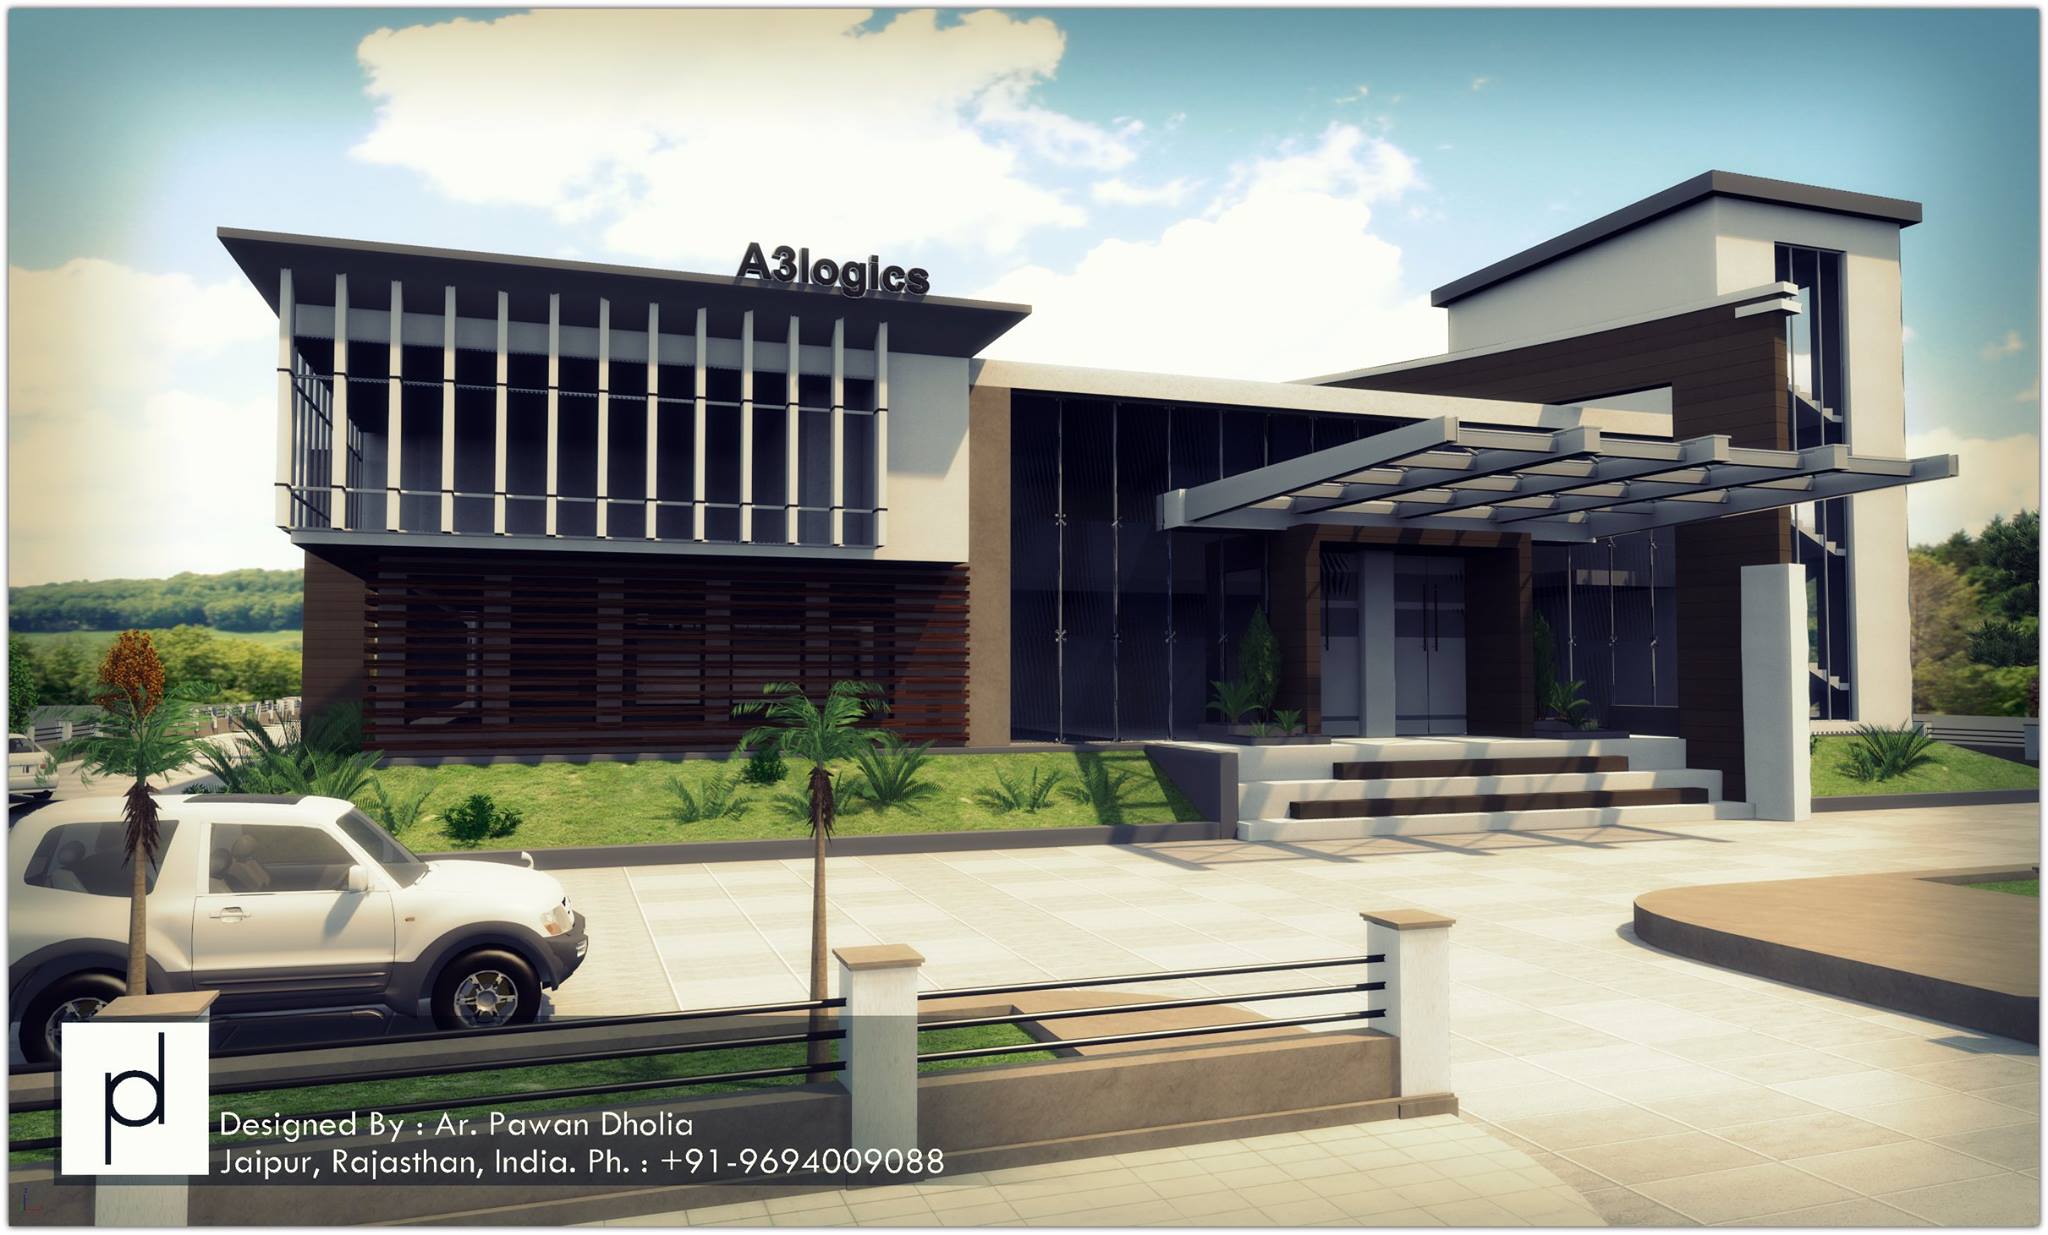 Proposed Office Building for IT Company at Ramchandrapura, Jaipur